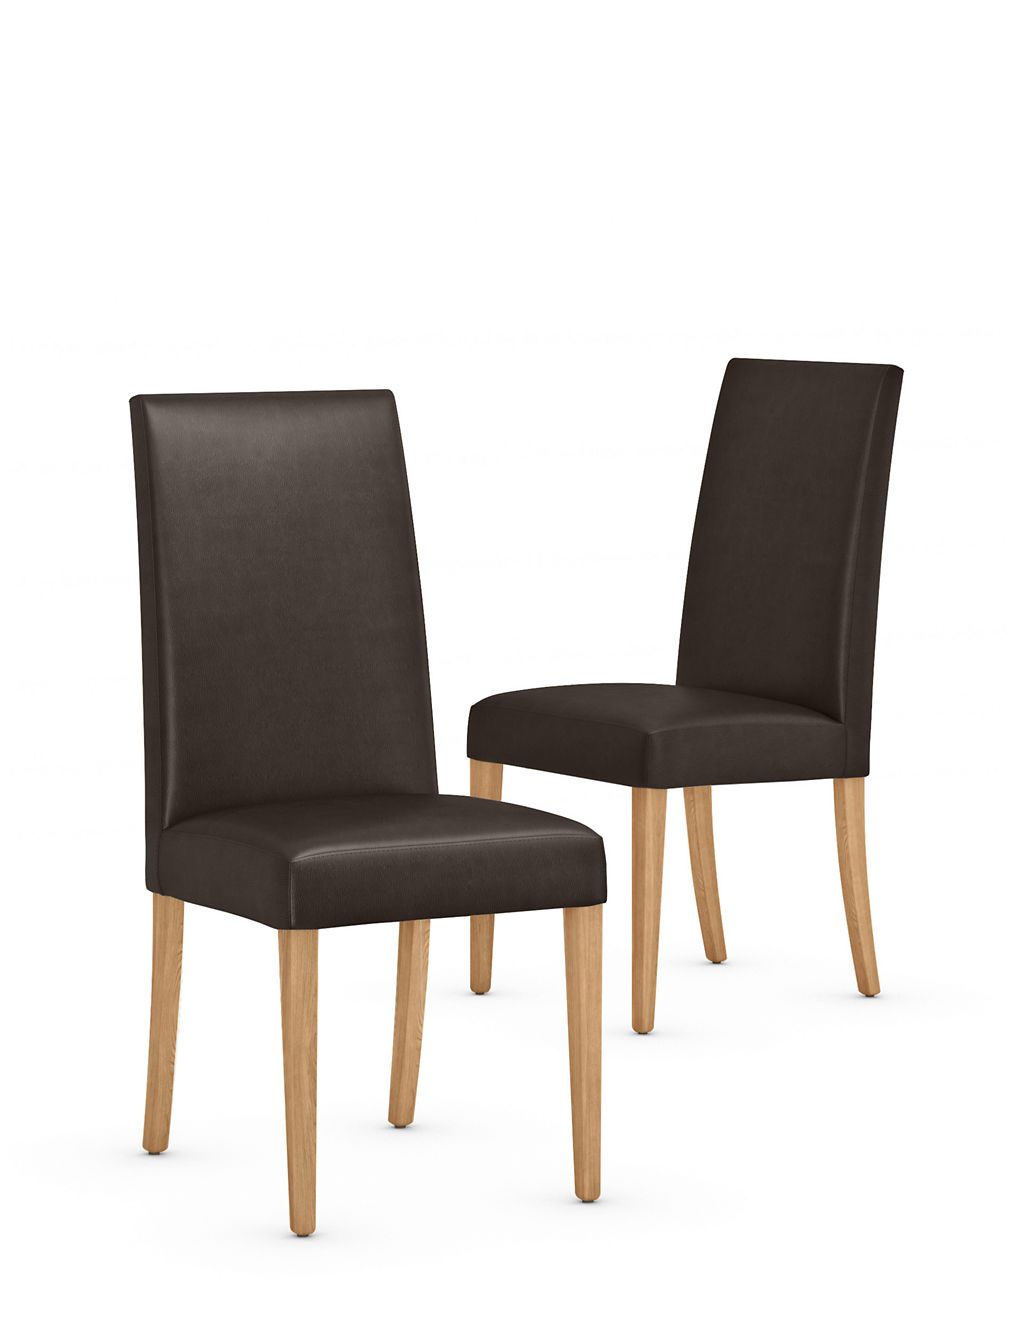 Set of 2 Alton Leather Chairs 1 of 7